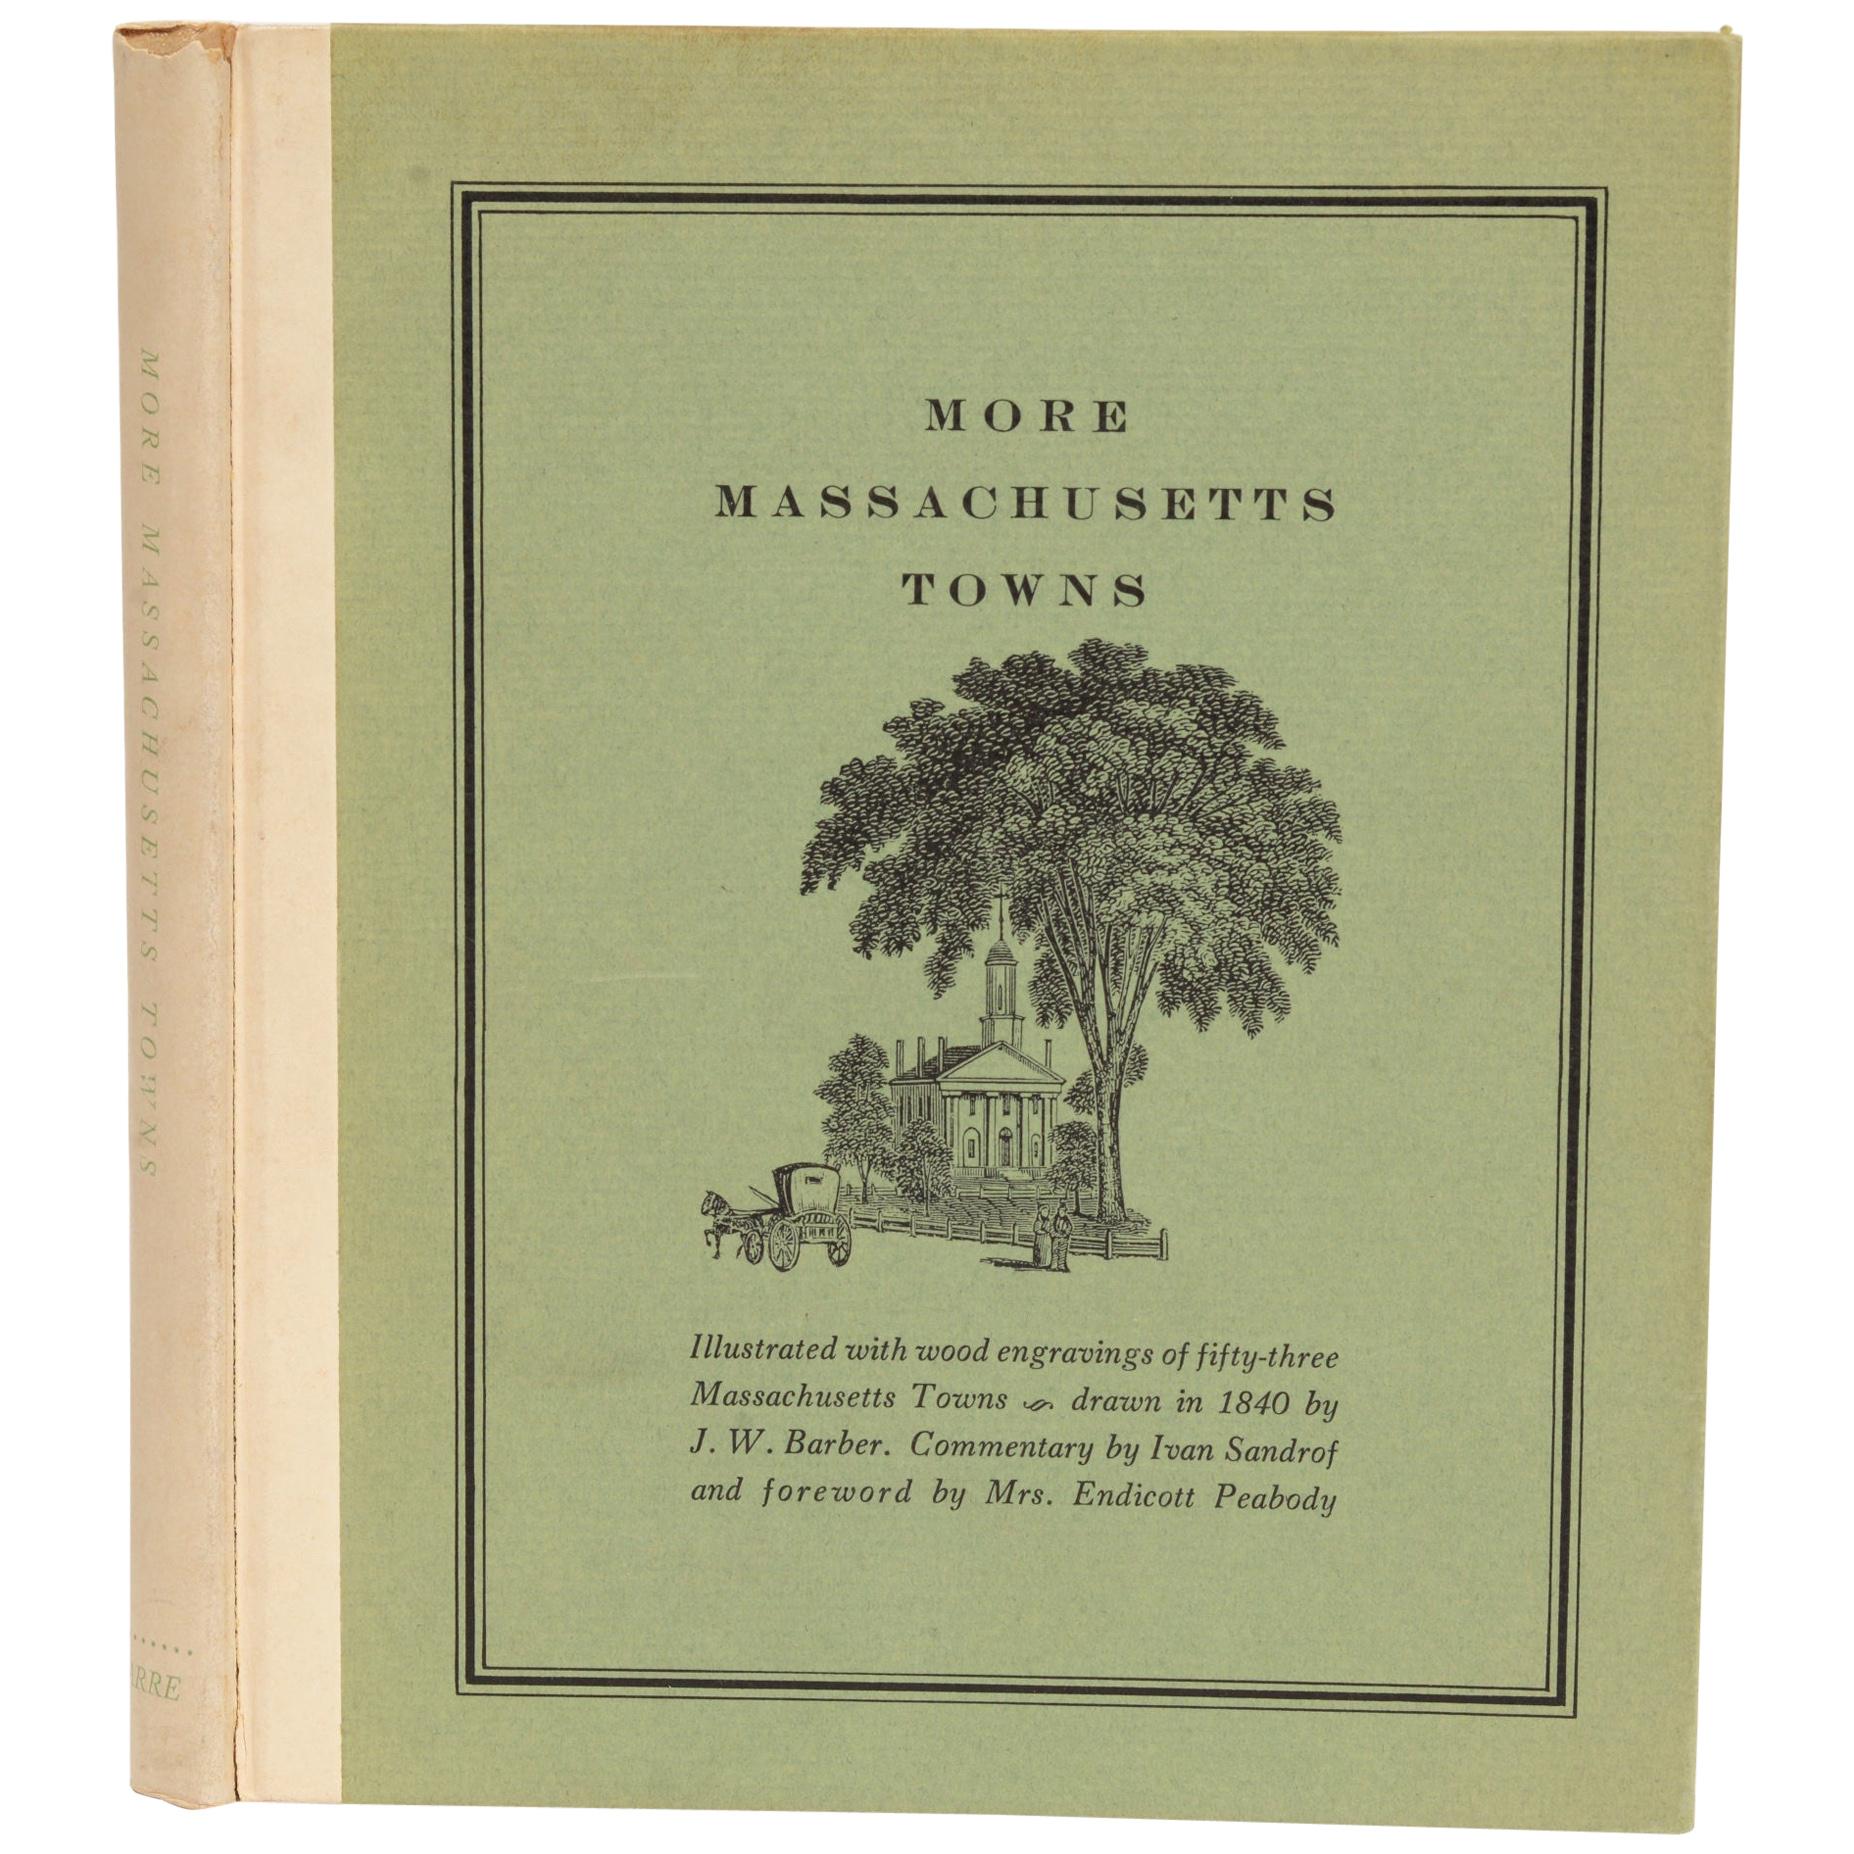 More Massachusetts Towns:: Illustrated with Wood Engravings of 53 Mass. Städte